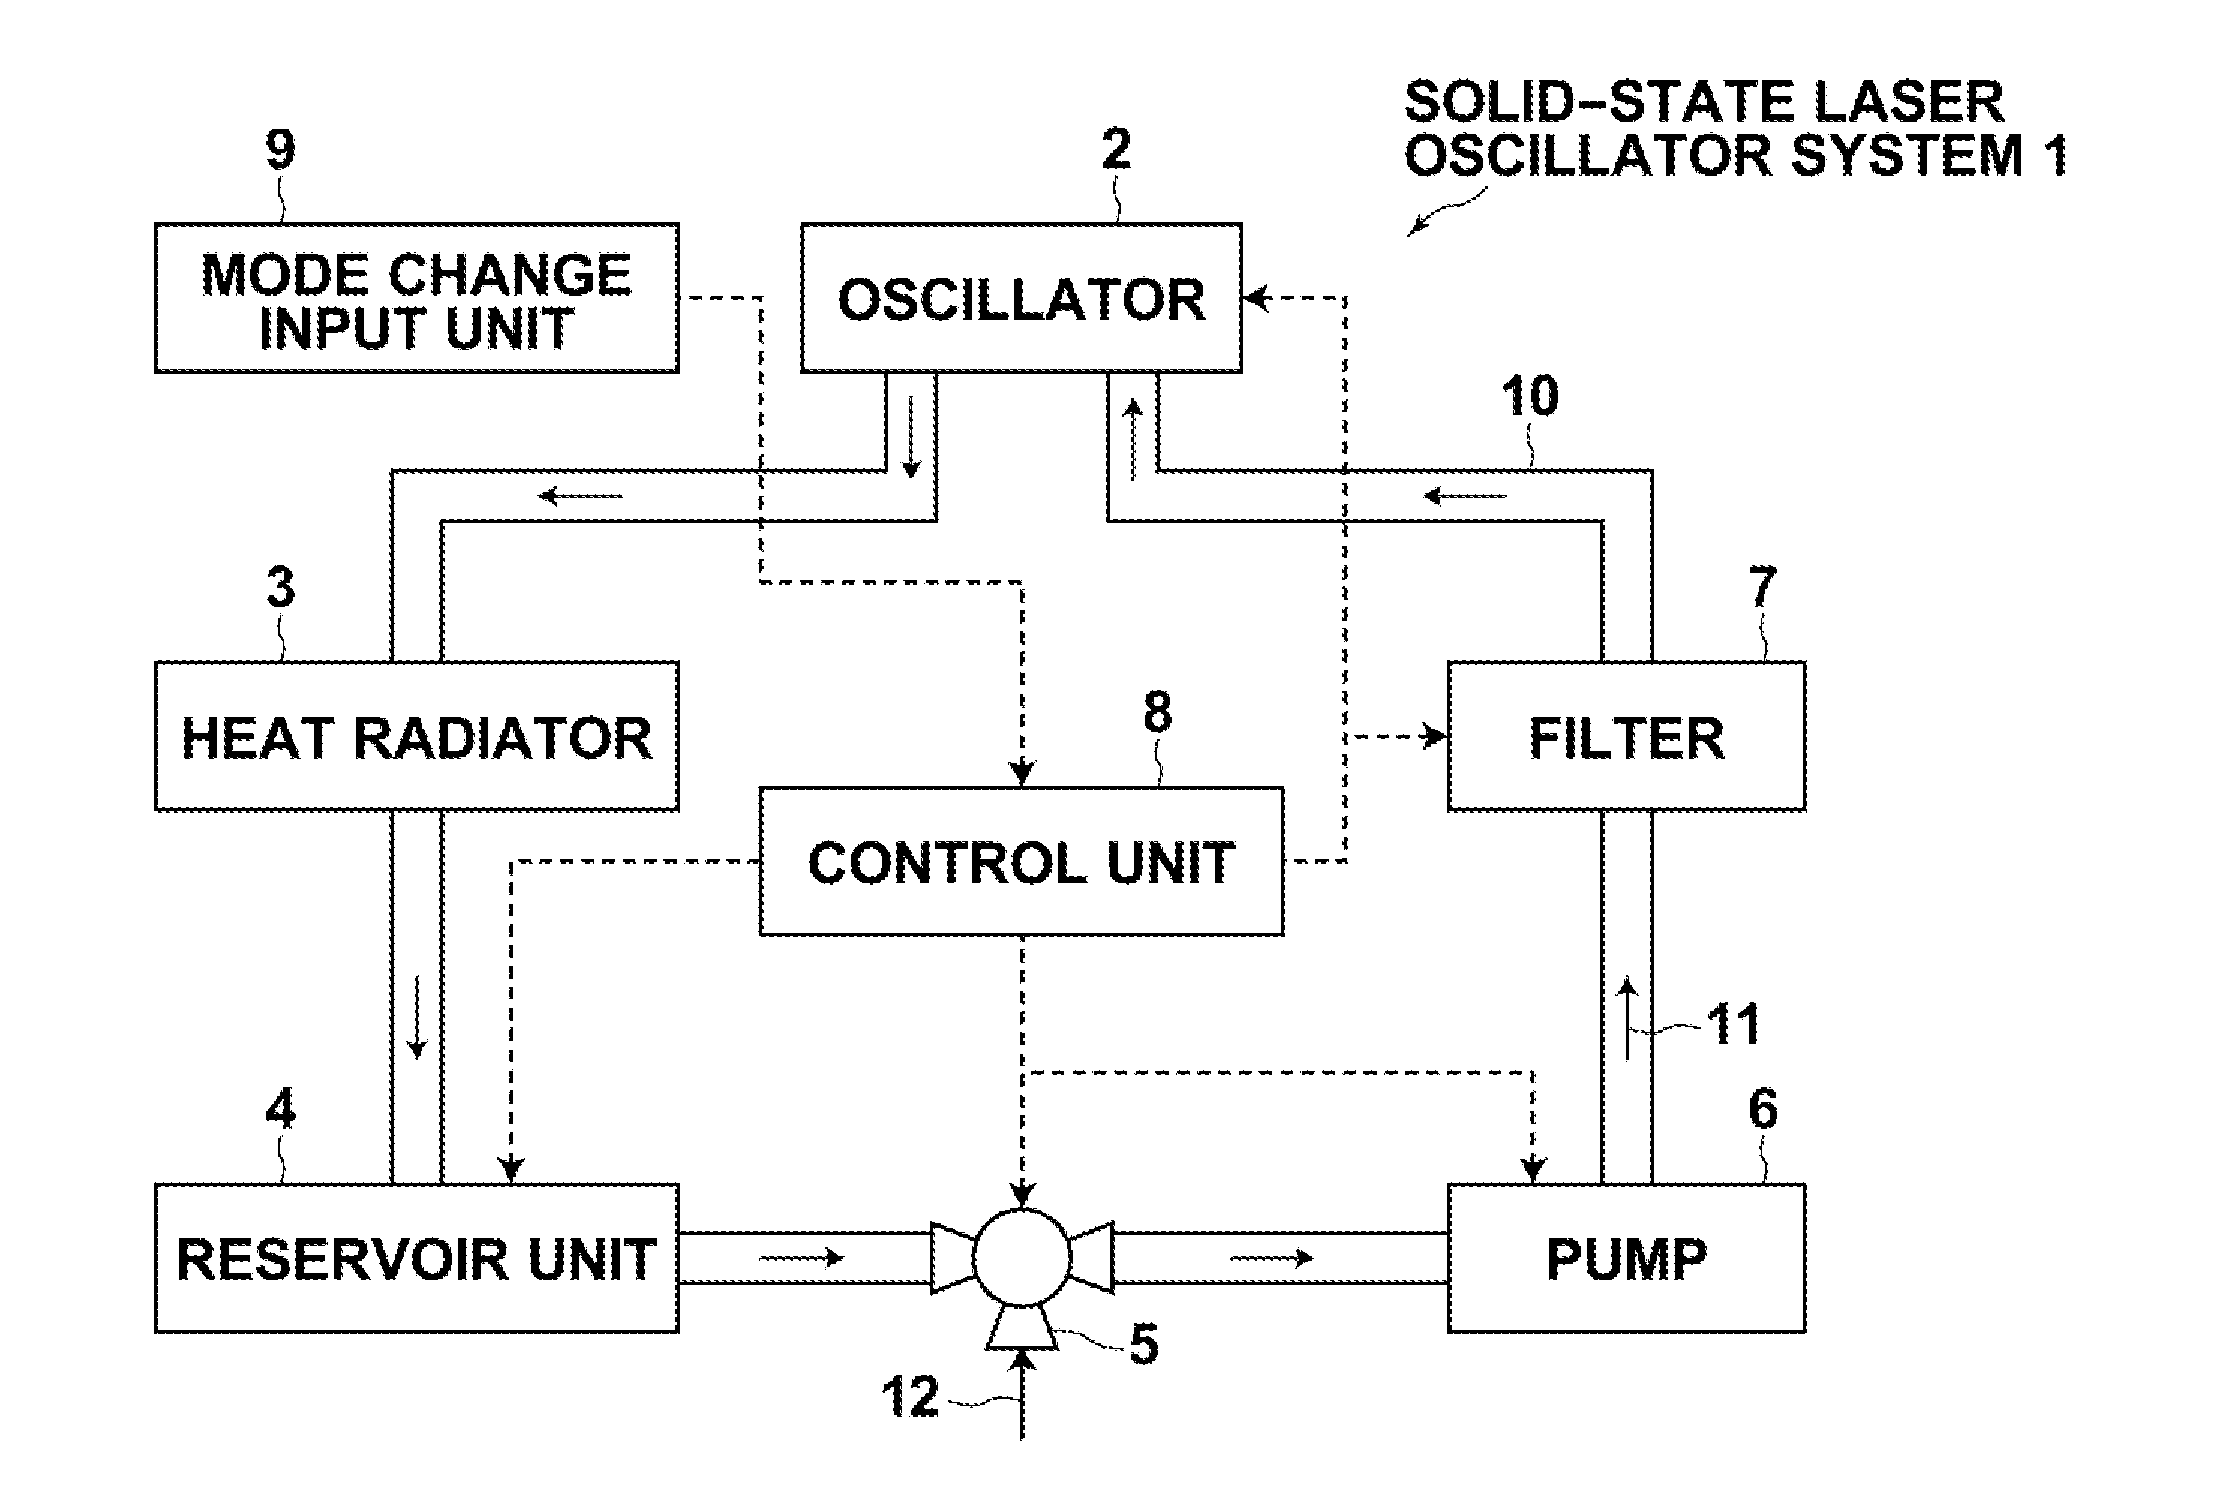 Cooling system, reservoir unit and cartridge, as well as solid-state laser oscillator system provided with the same